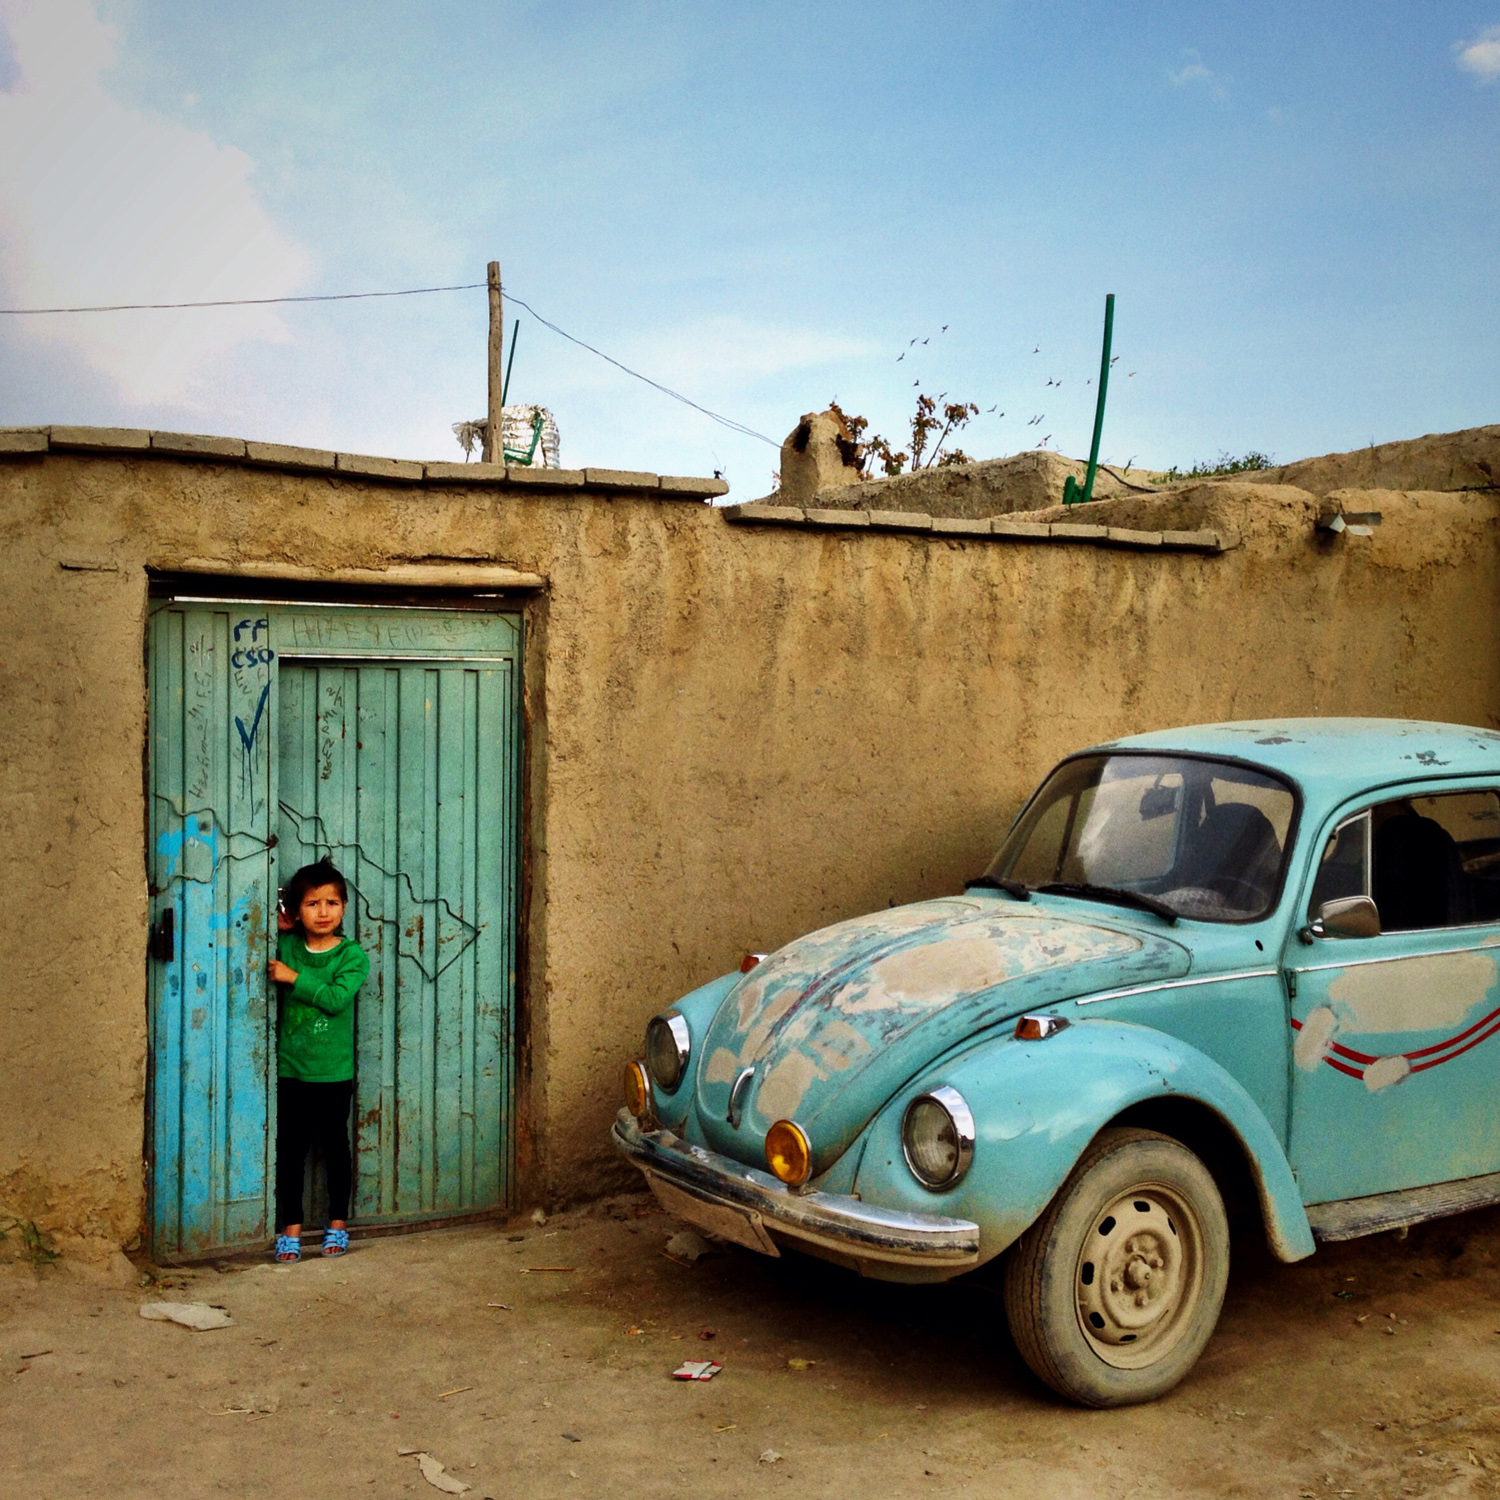 Wazir Abad, Kabul, AfghanistanNot every day you see a Volks Wagen in Afghanistan. Andrew Quilty / Oculi. 20.4.2014.